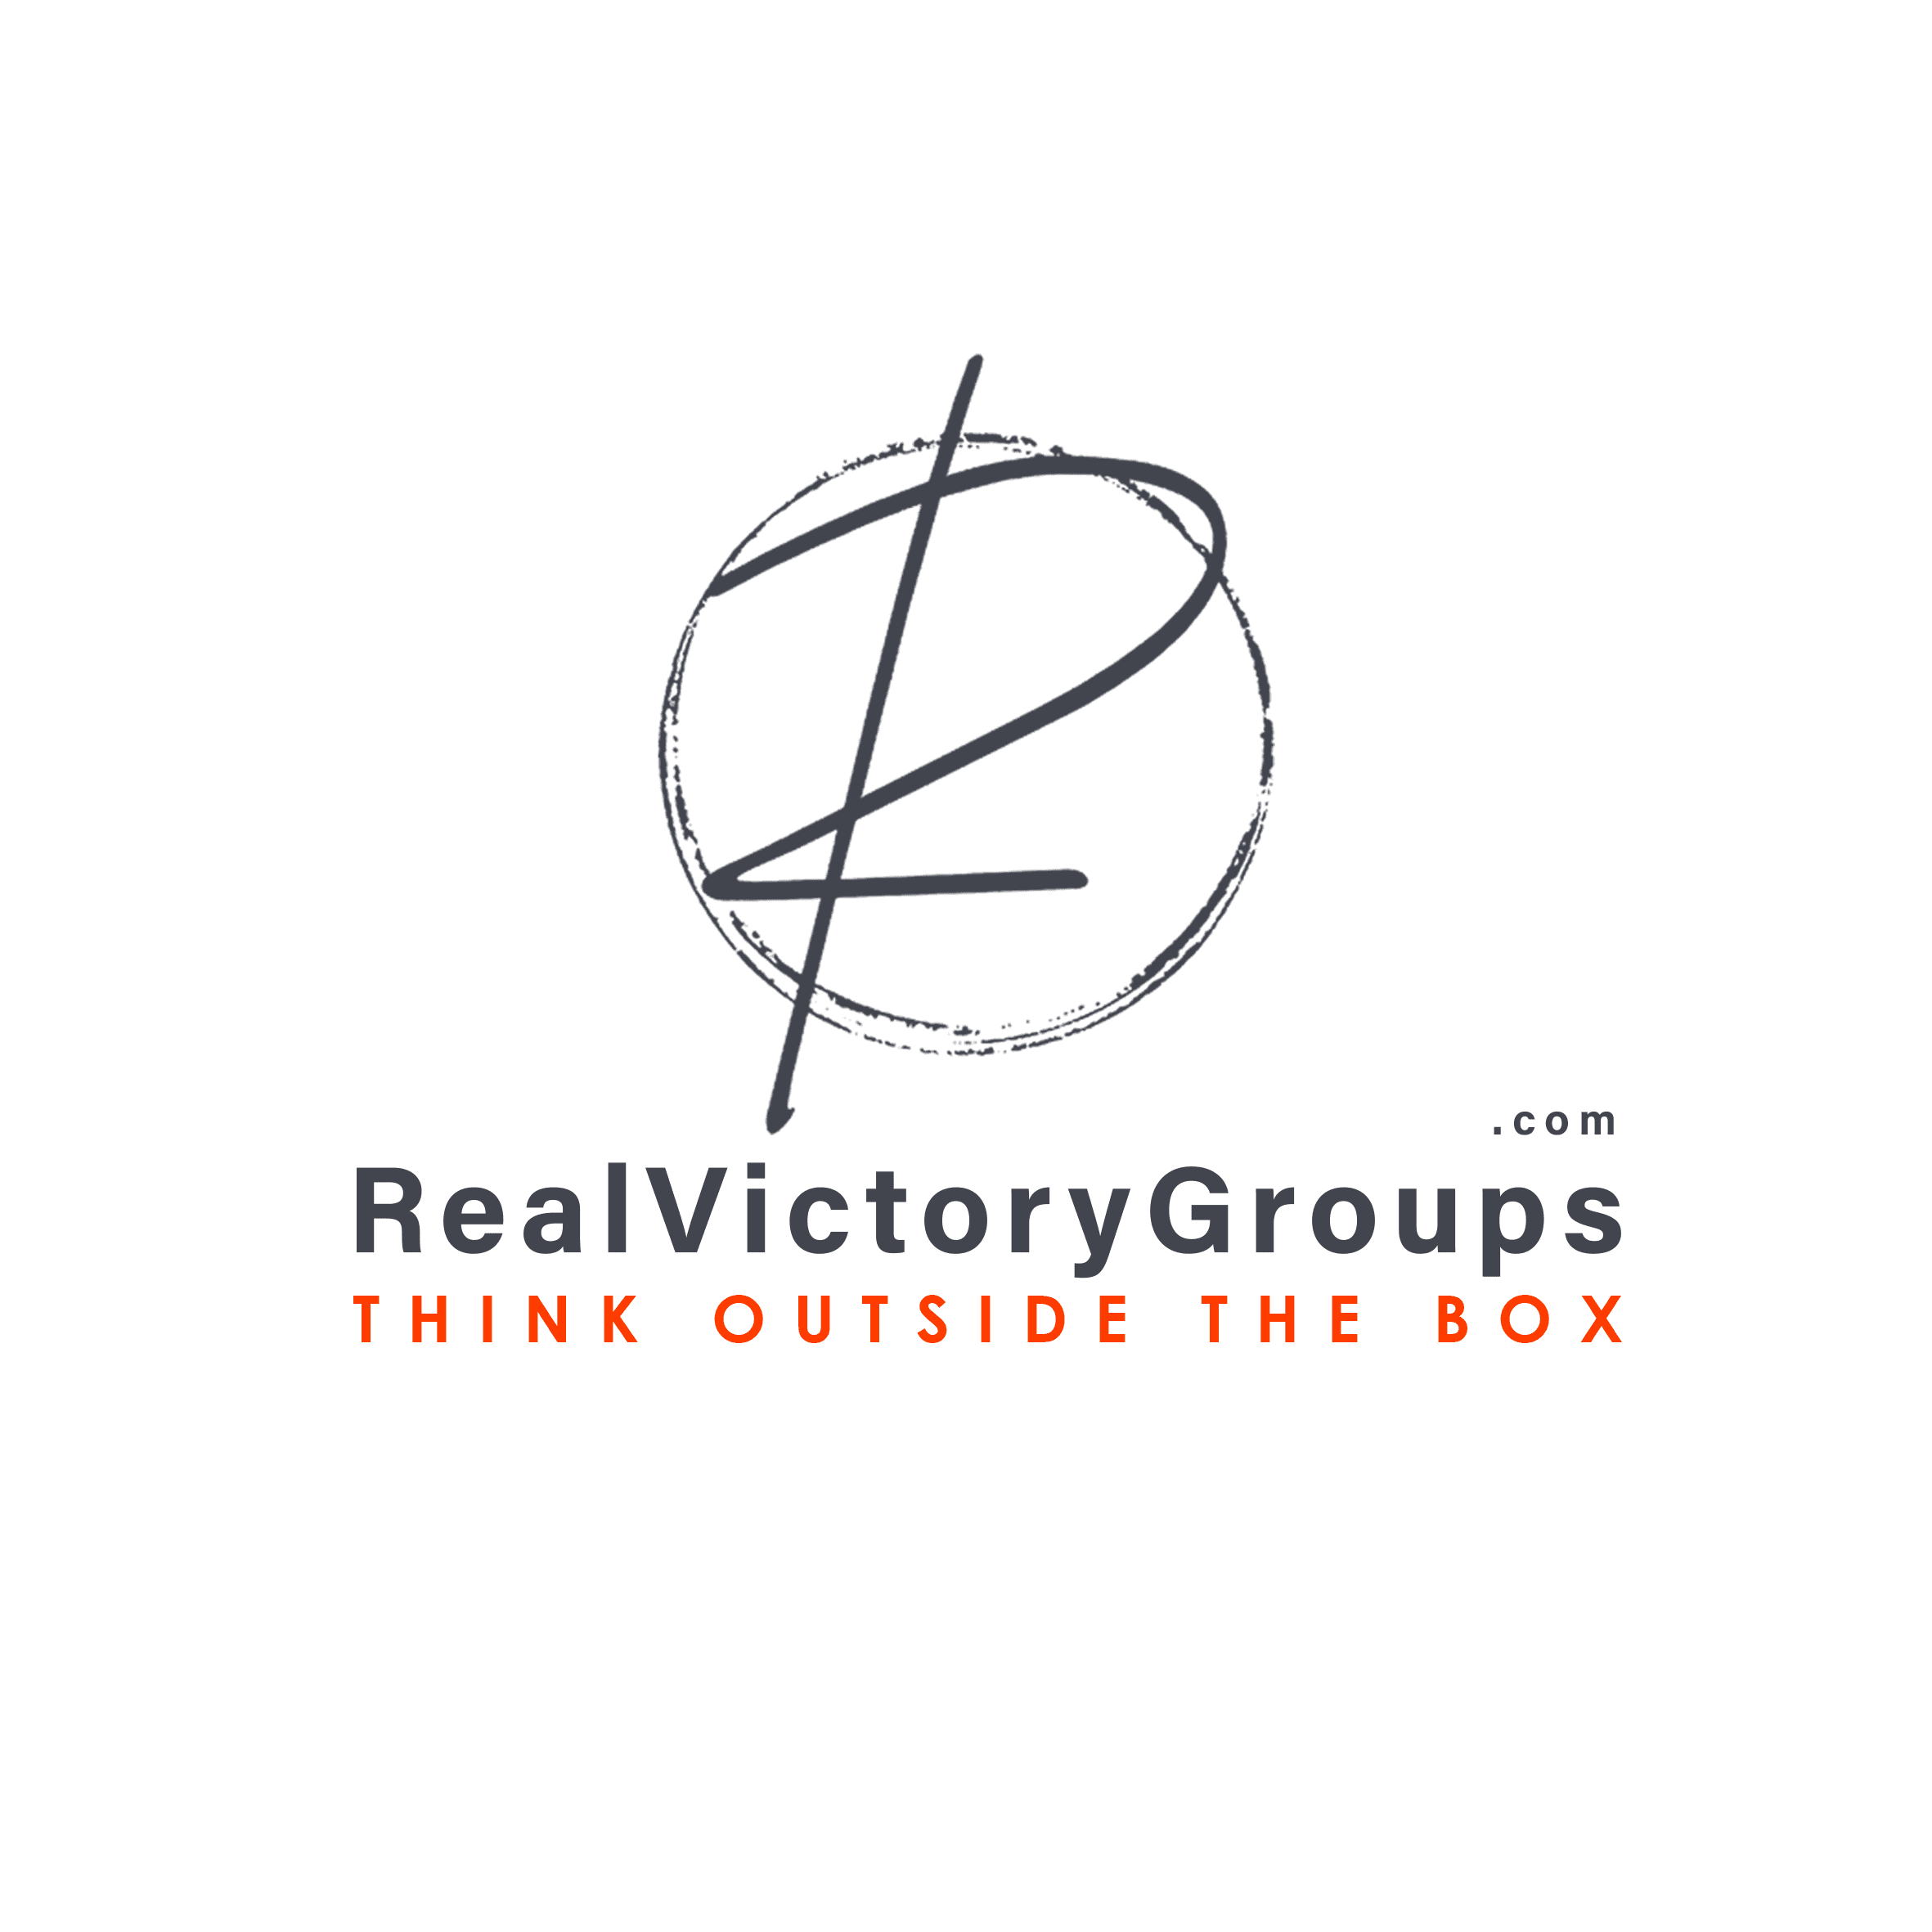 Real Victory Groups